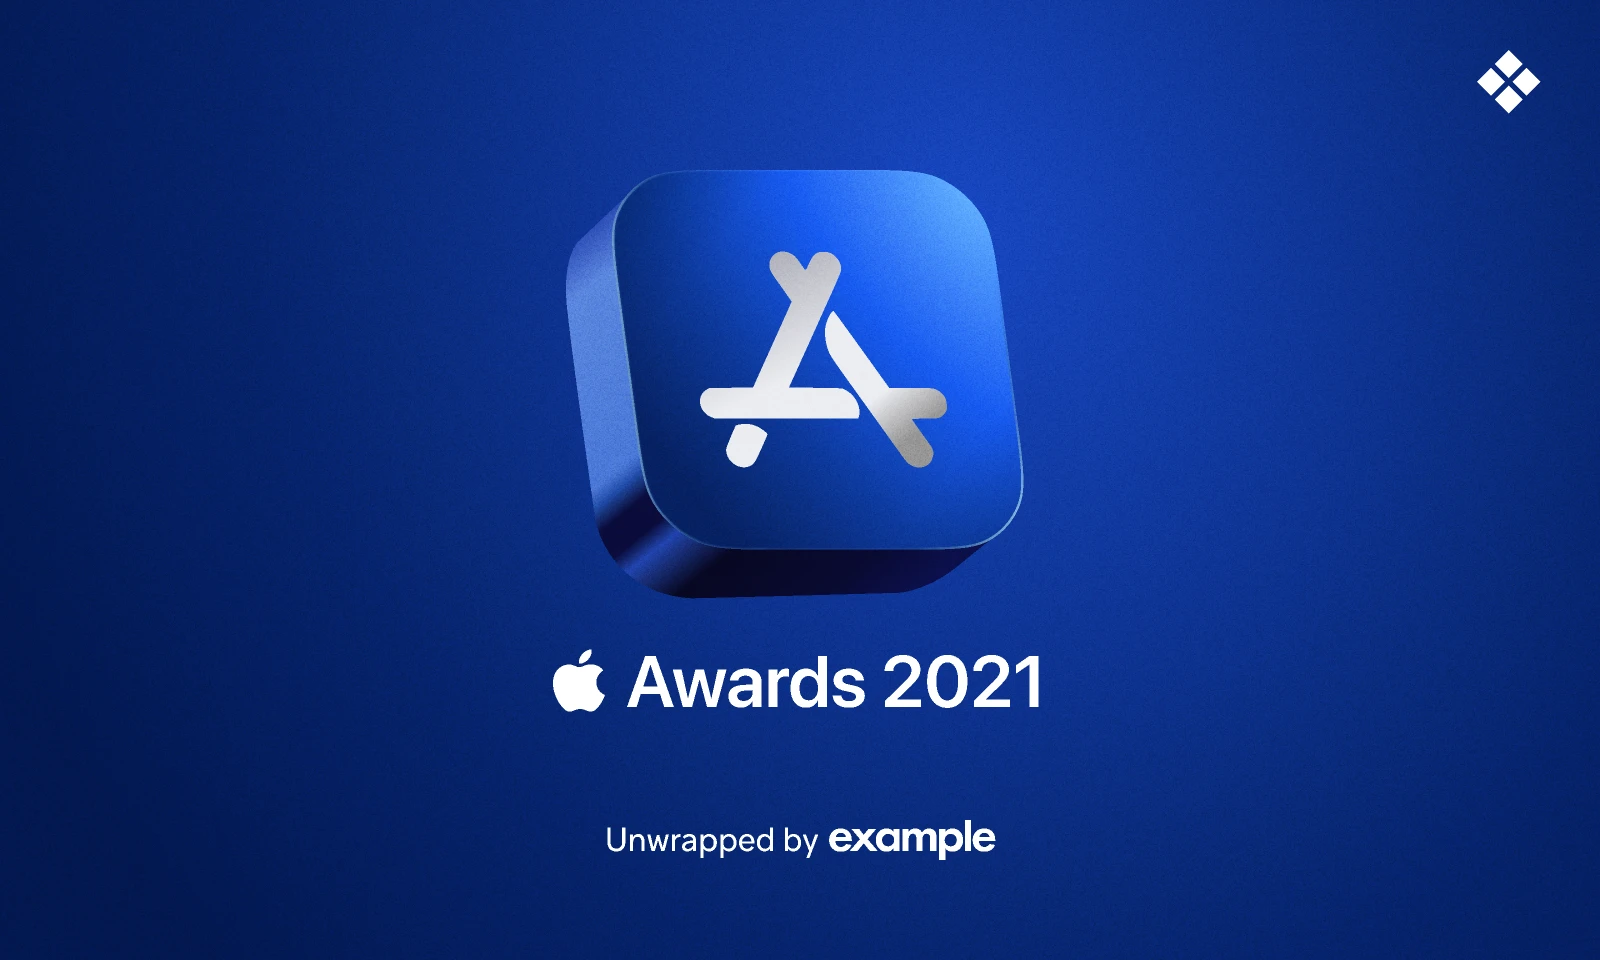 App Store Awards 2021 for Figma and Adobe XD